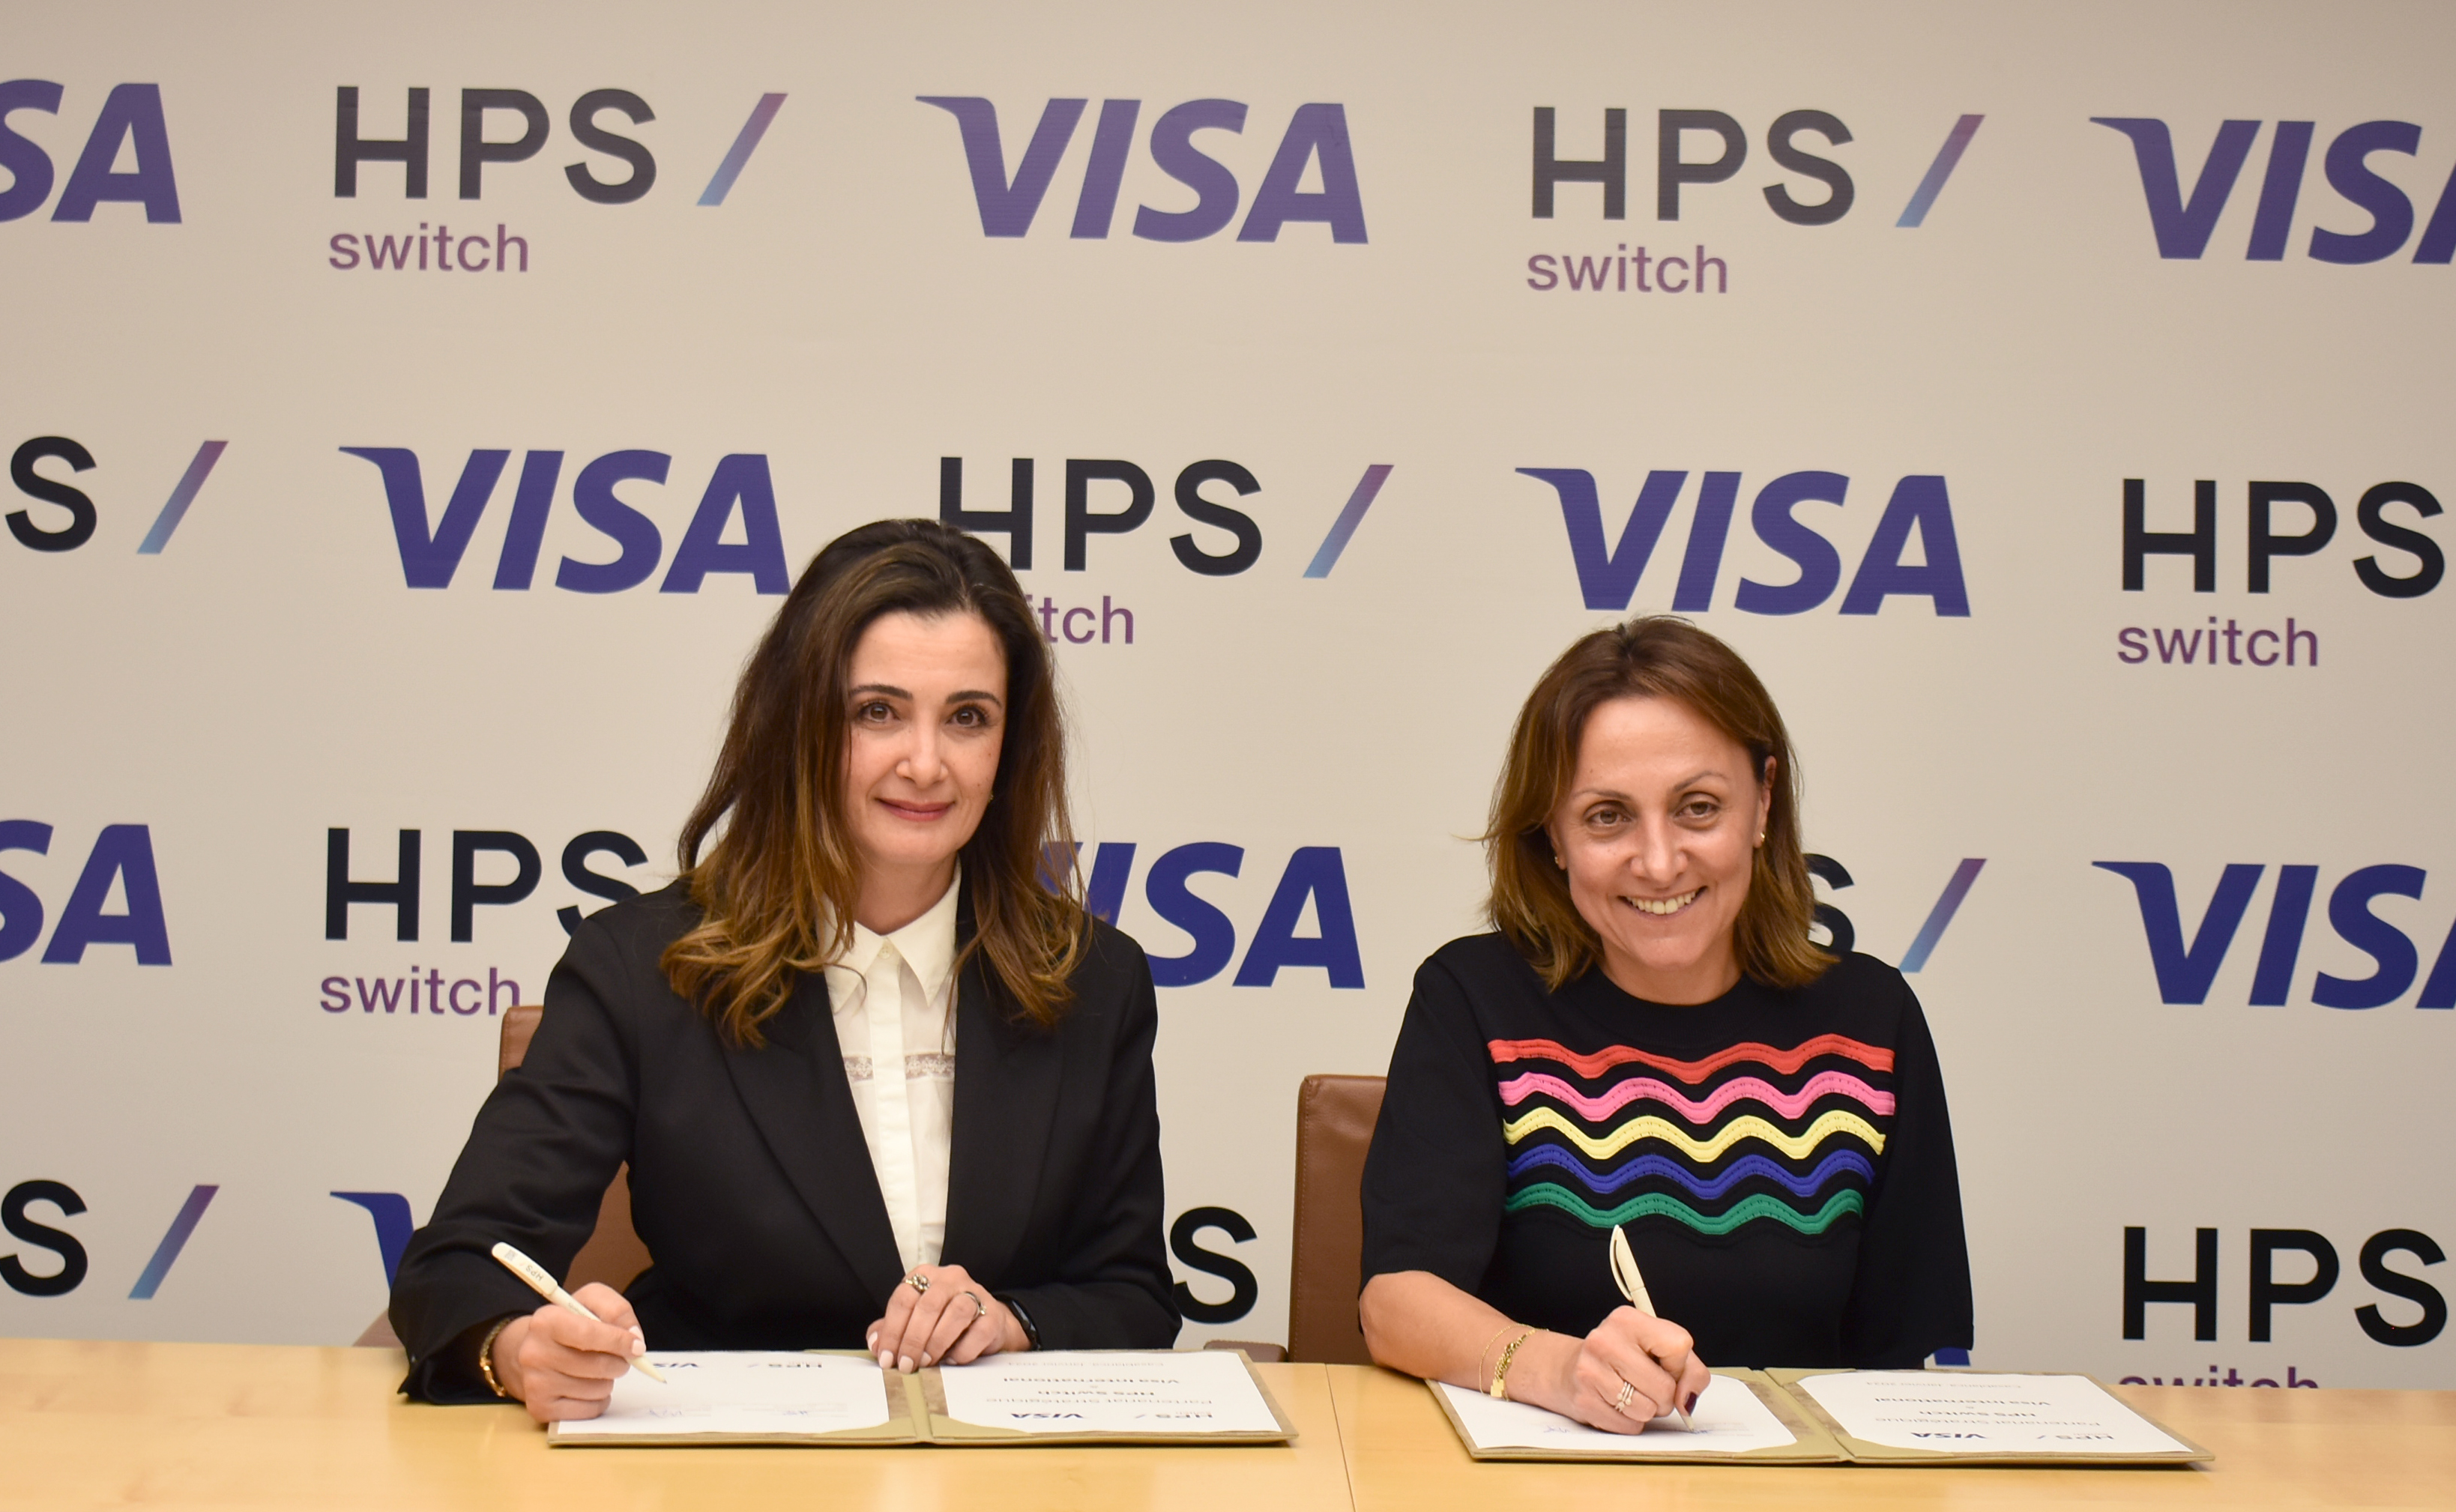 Visa and HPS Switch renew their alliance